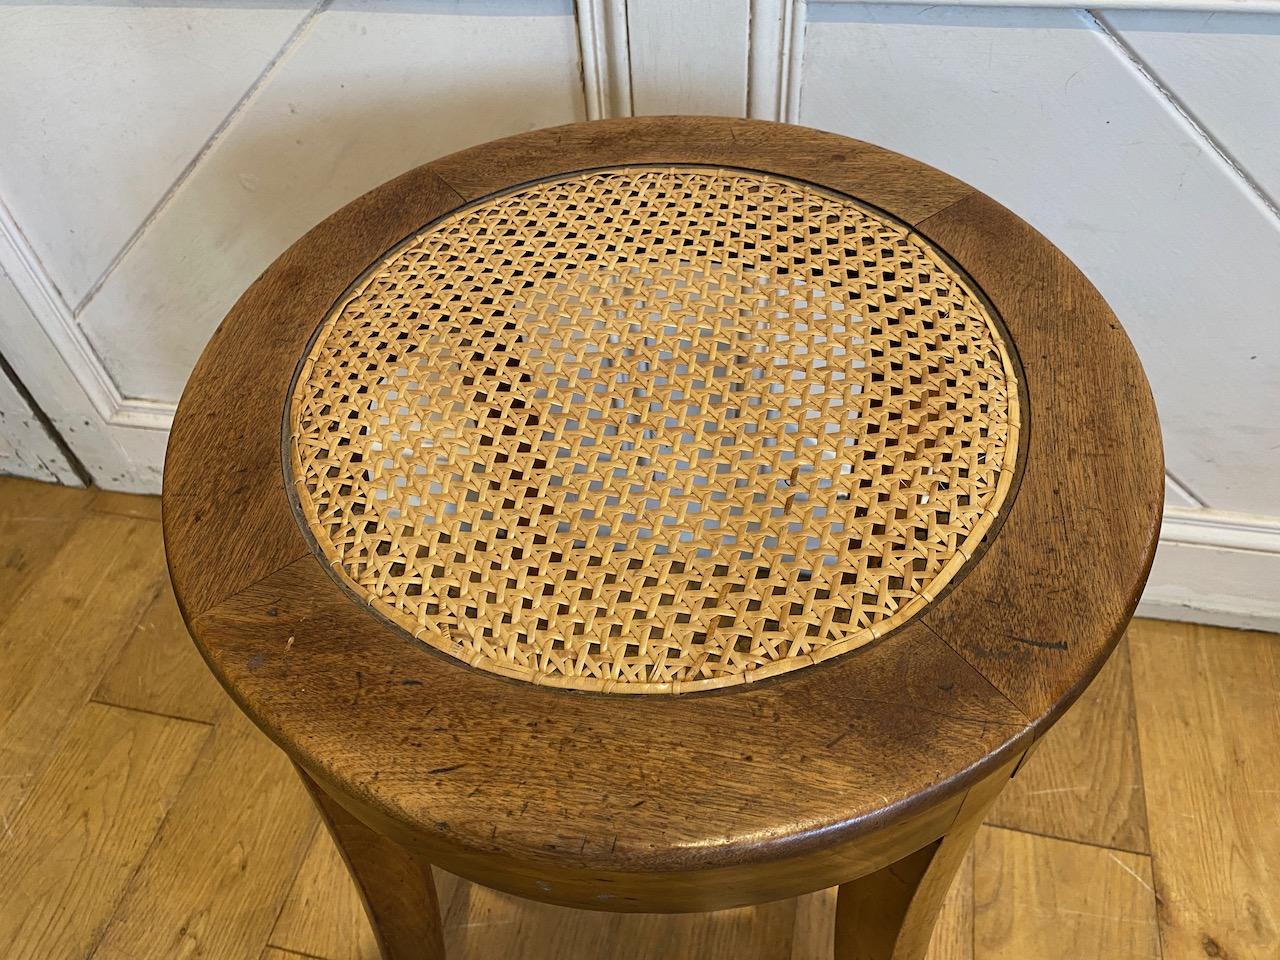 Caned Low Table or Seat